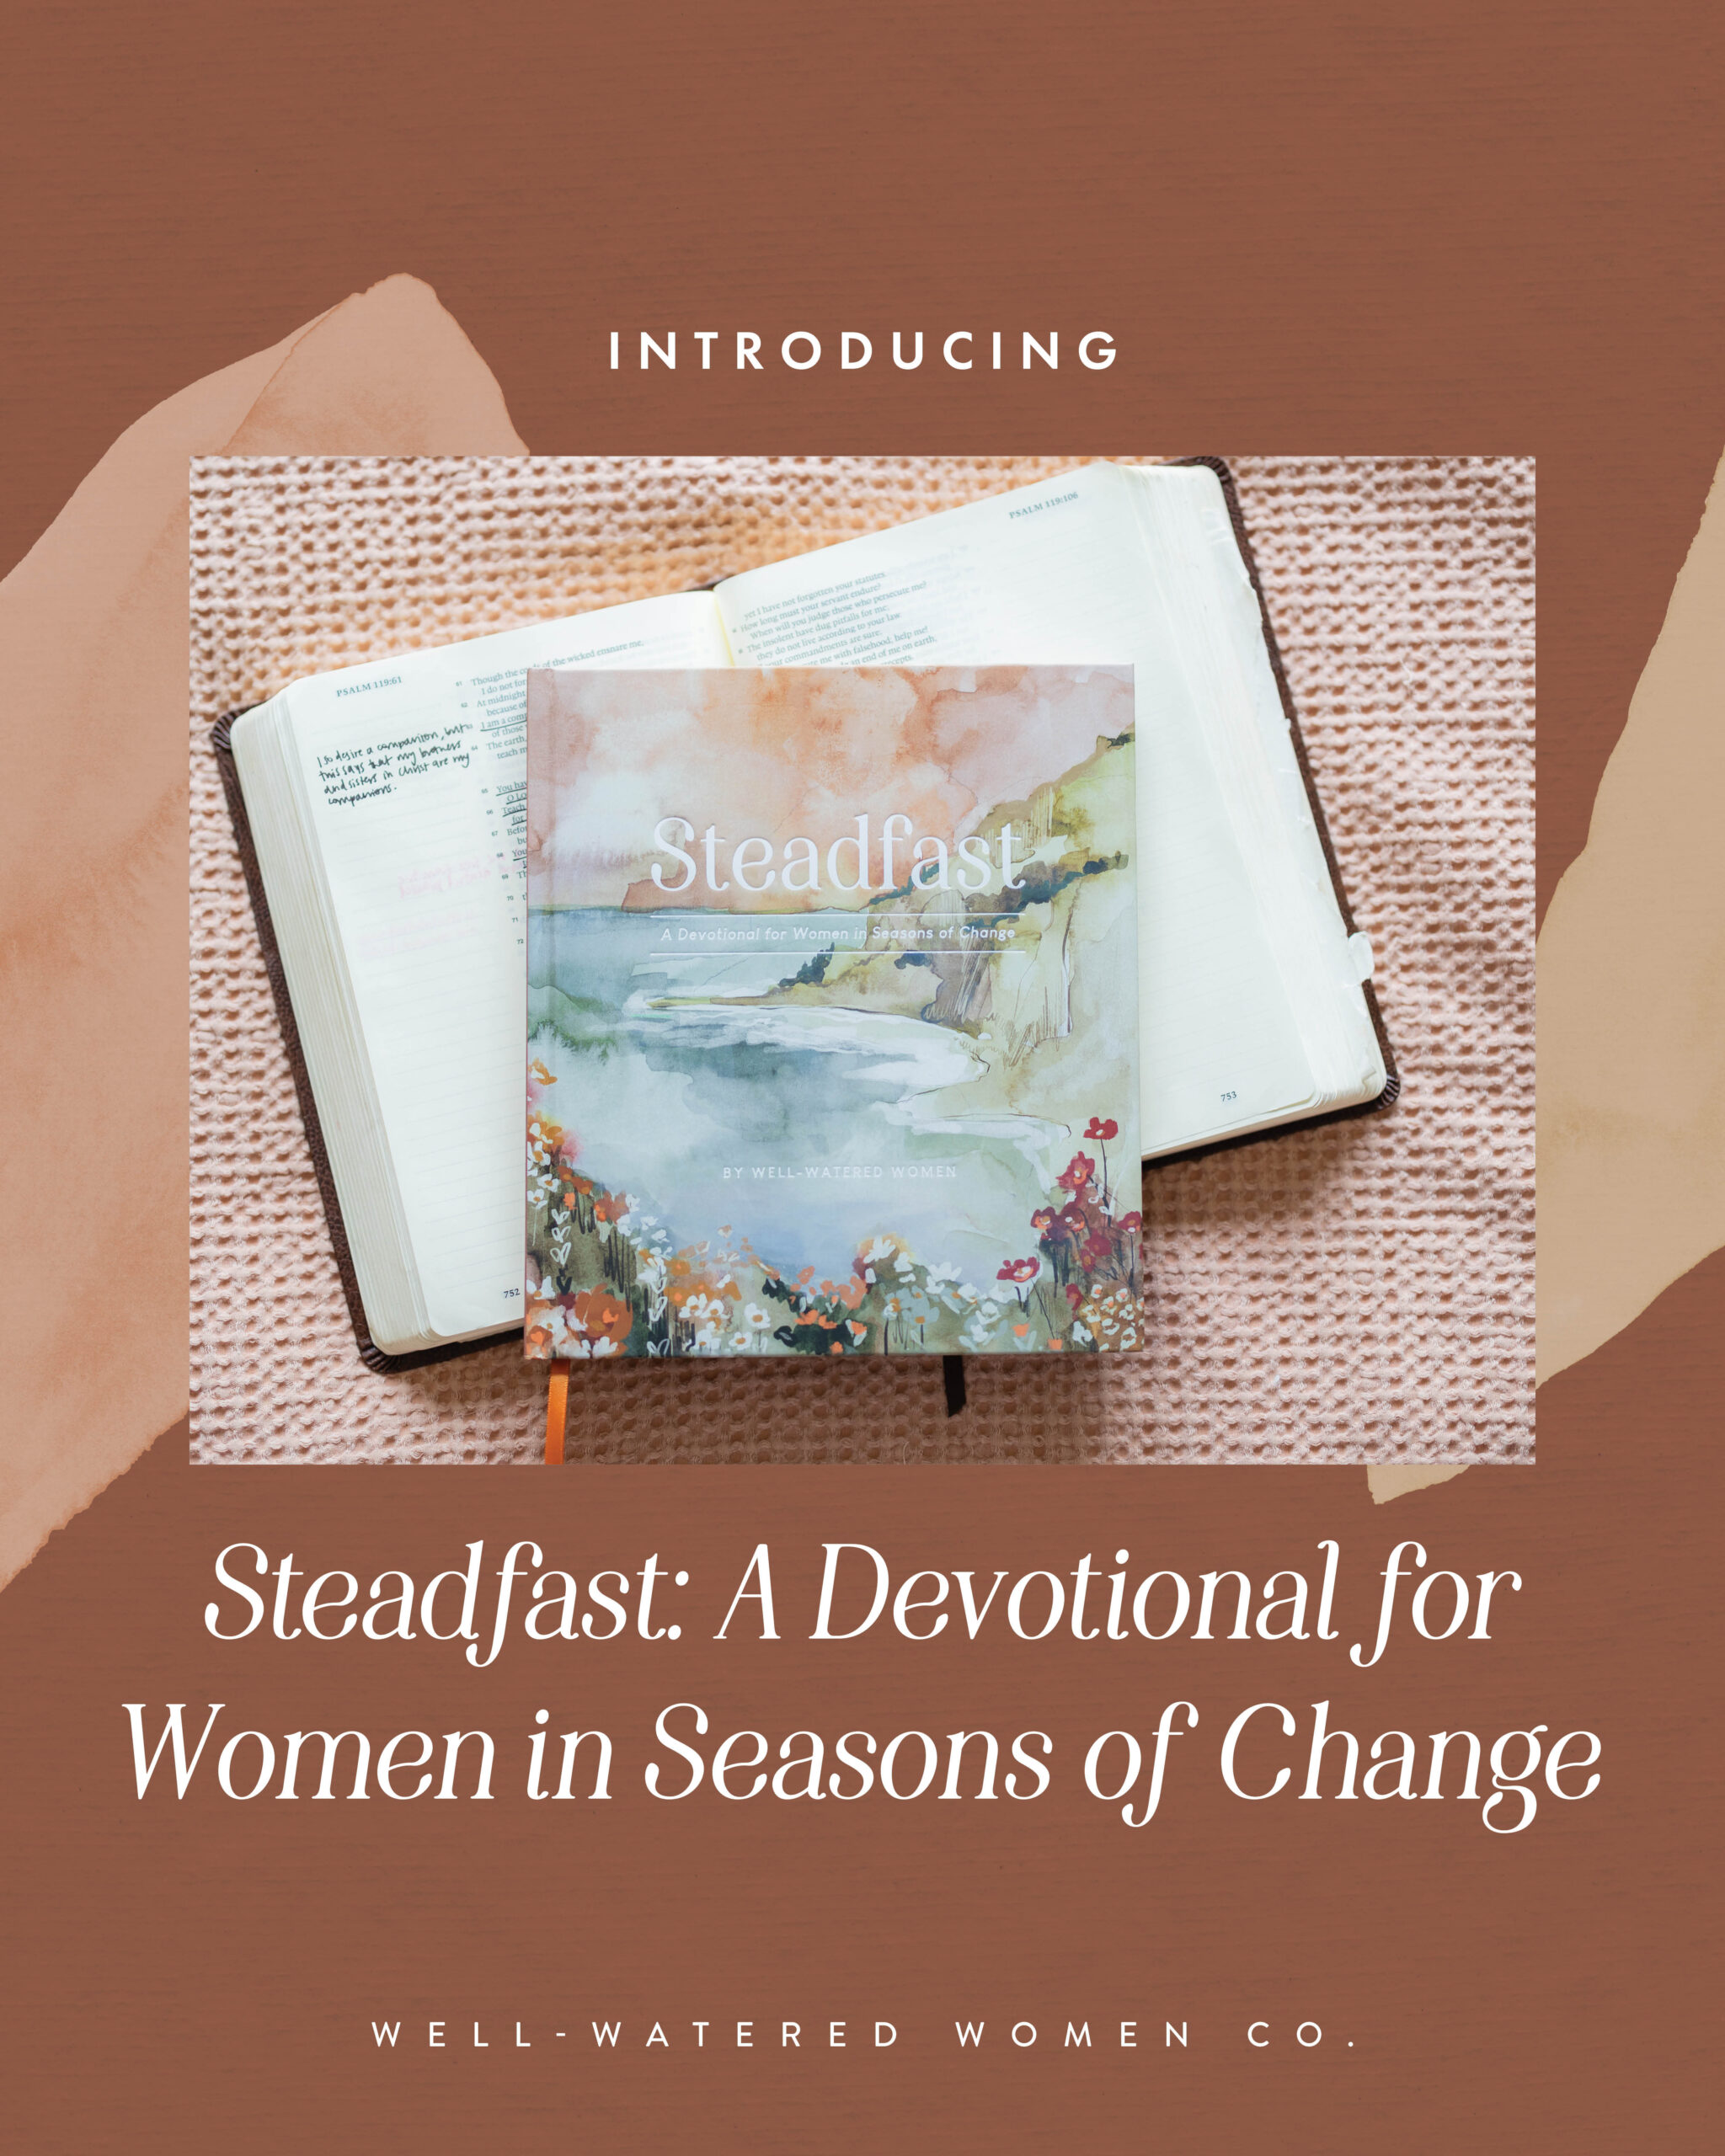 Introducing Steadfast - an article from Well-Watered Women